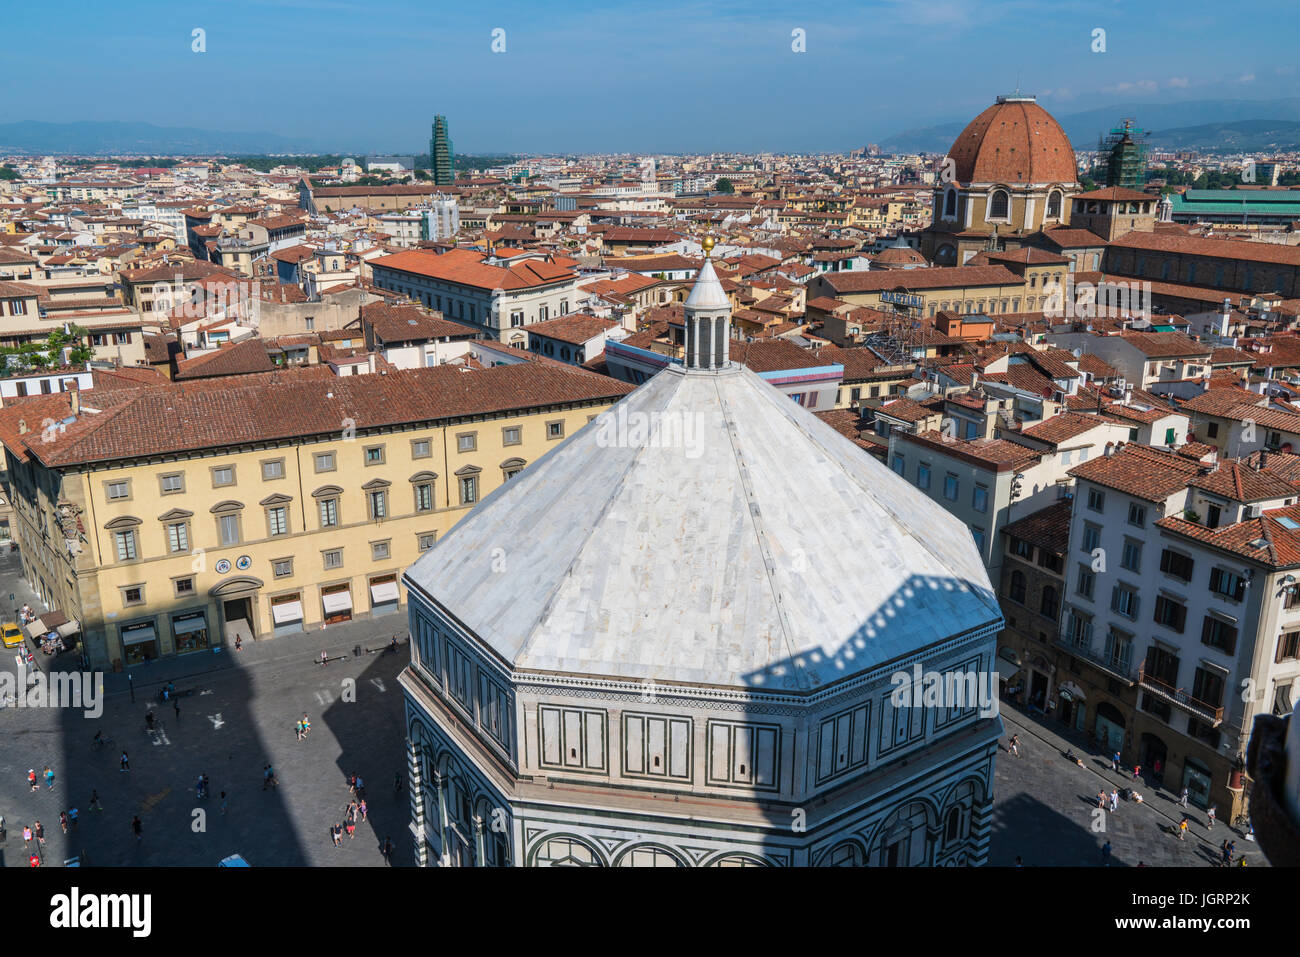 Rooftops and baptistery of Florence viewed from the dome of the cathedral of Santa Maria in Florence, Italy Stock Photo